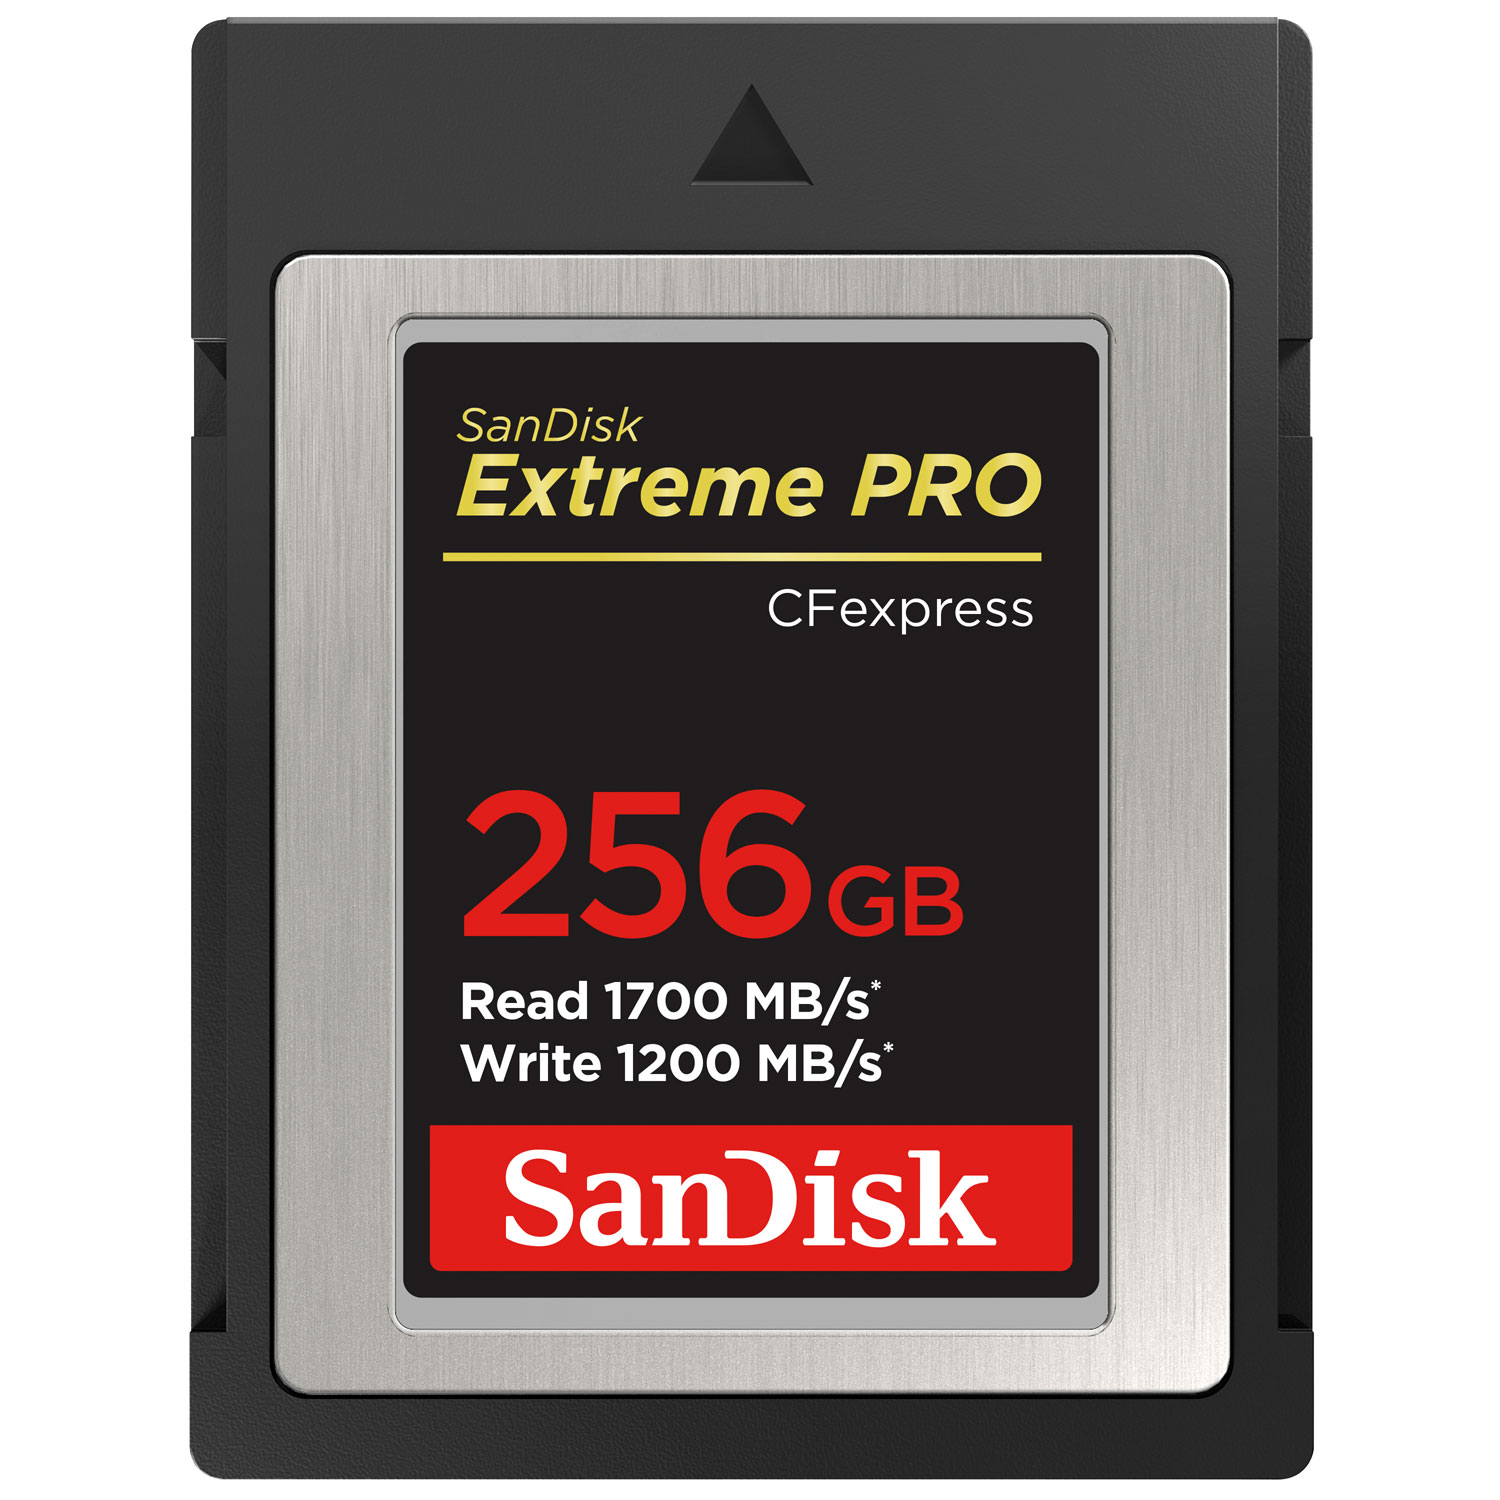 SanDisk Extreme Pro 256GB 1700MB/s CFexpress Memory Card